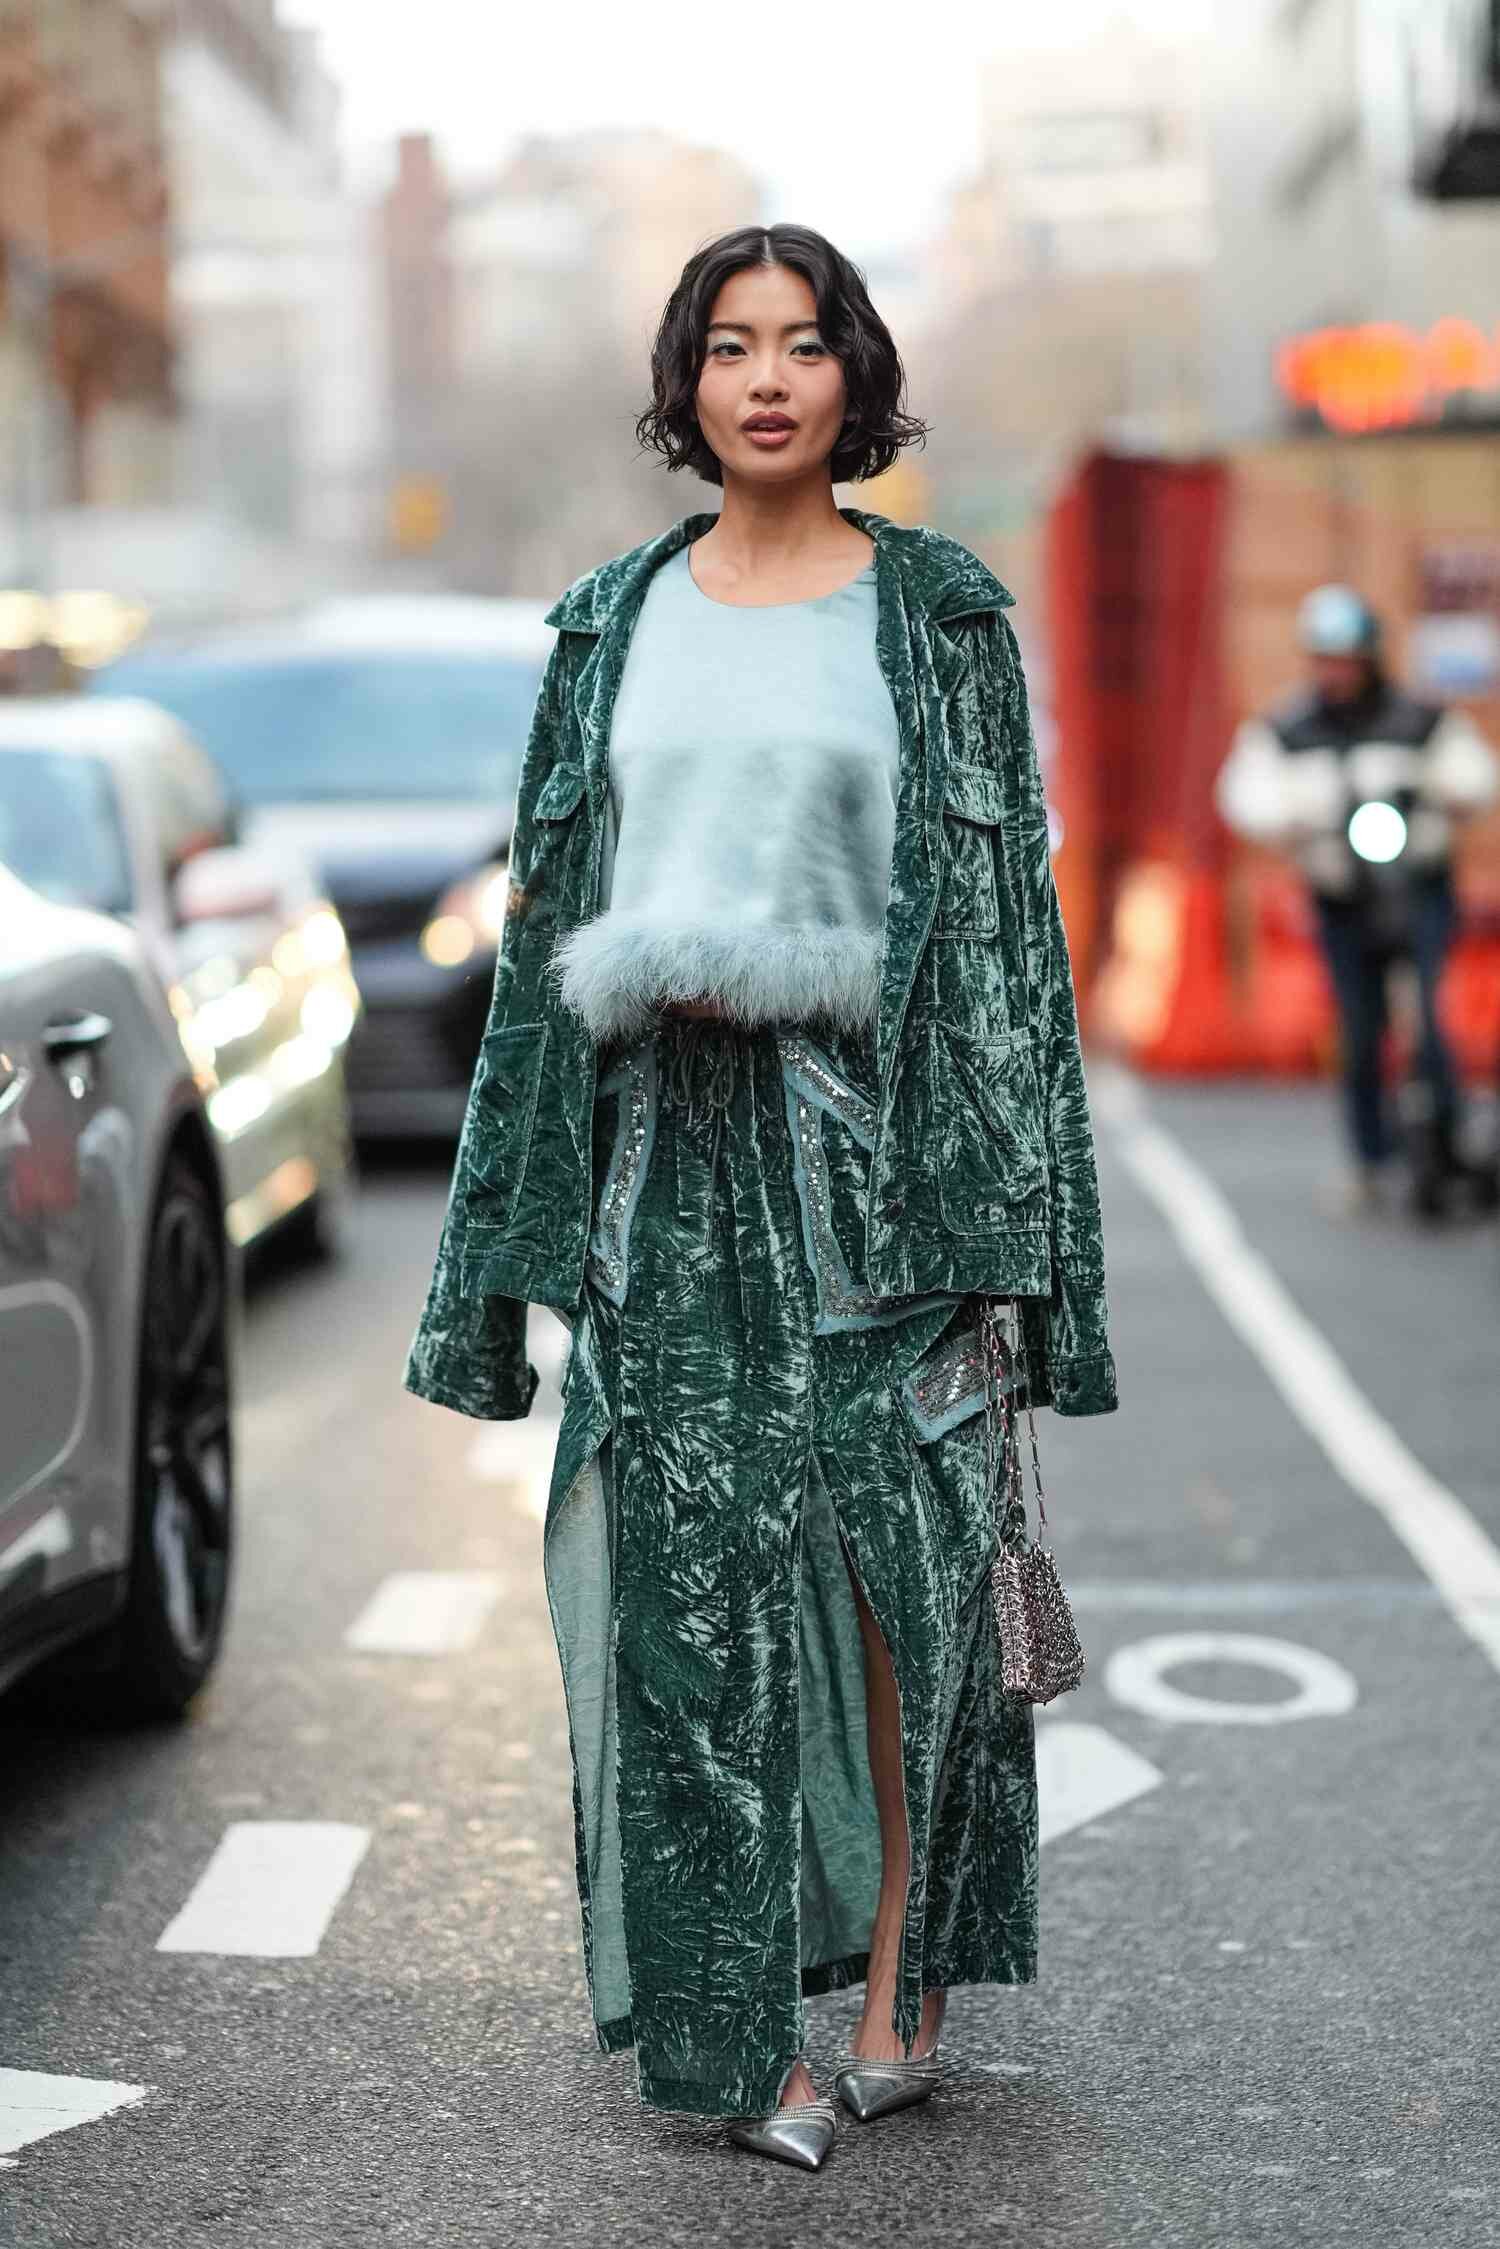 A NYFW guest wears a green Anna Sui outfit during New York Fashion Week.